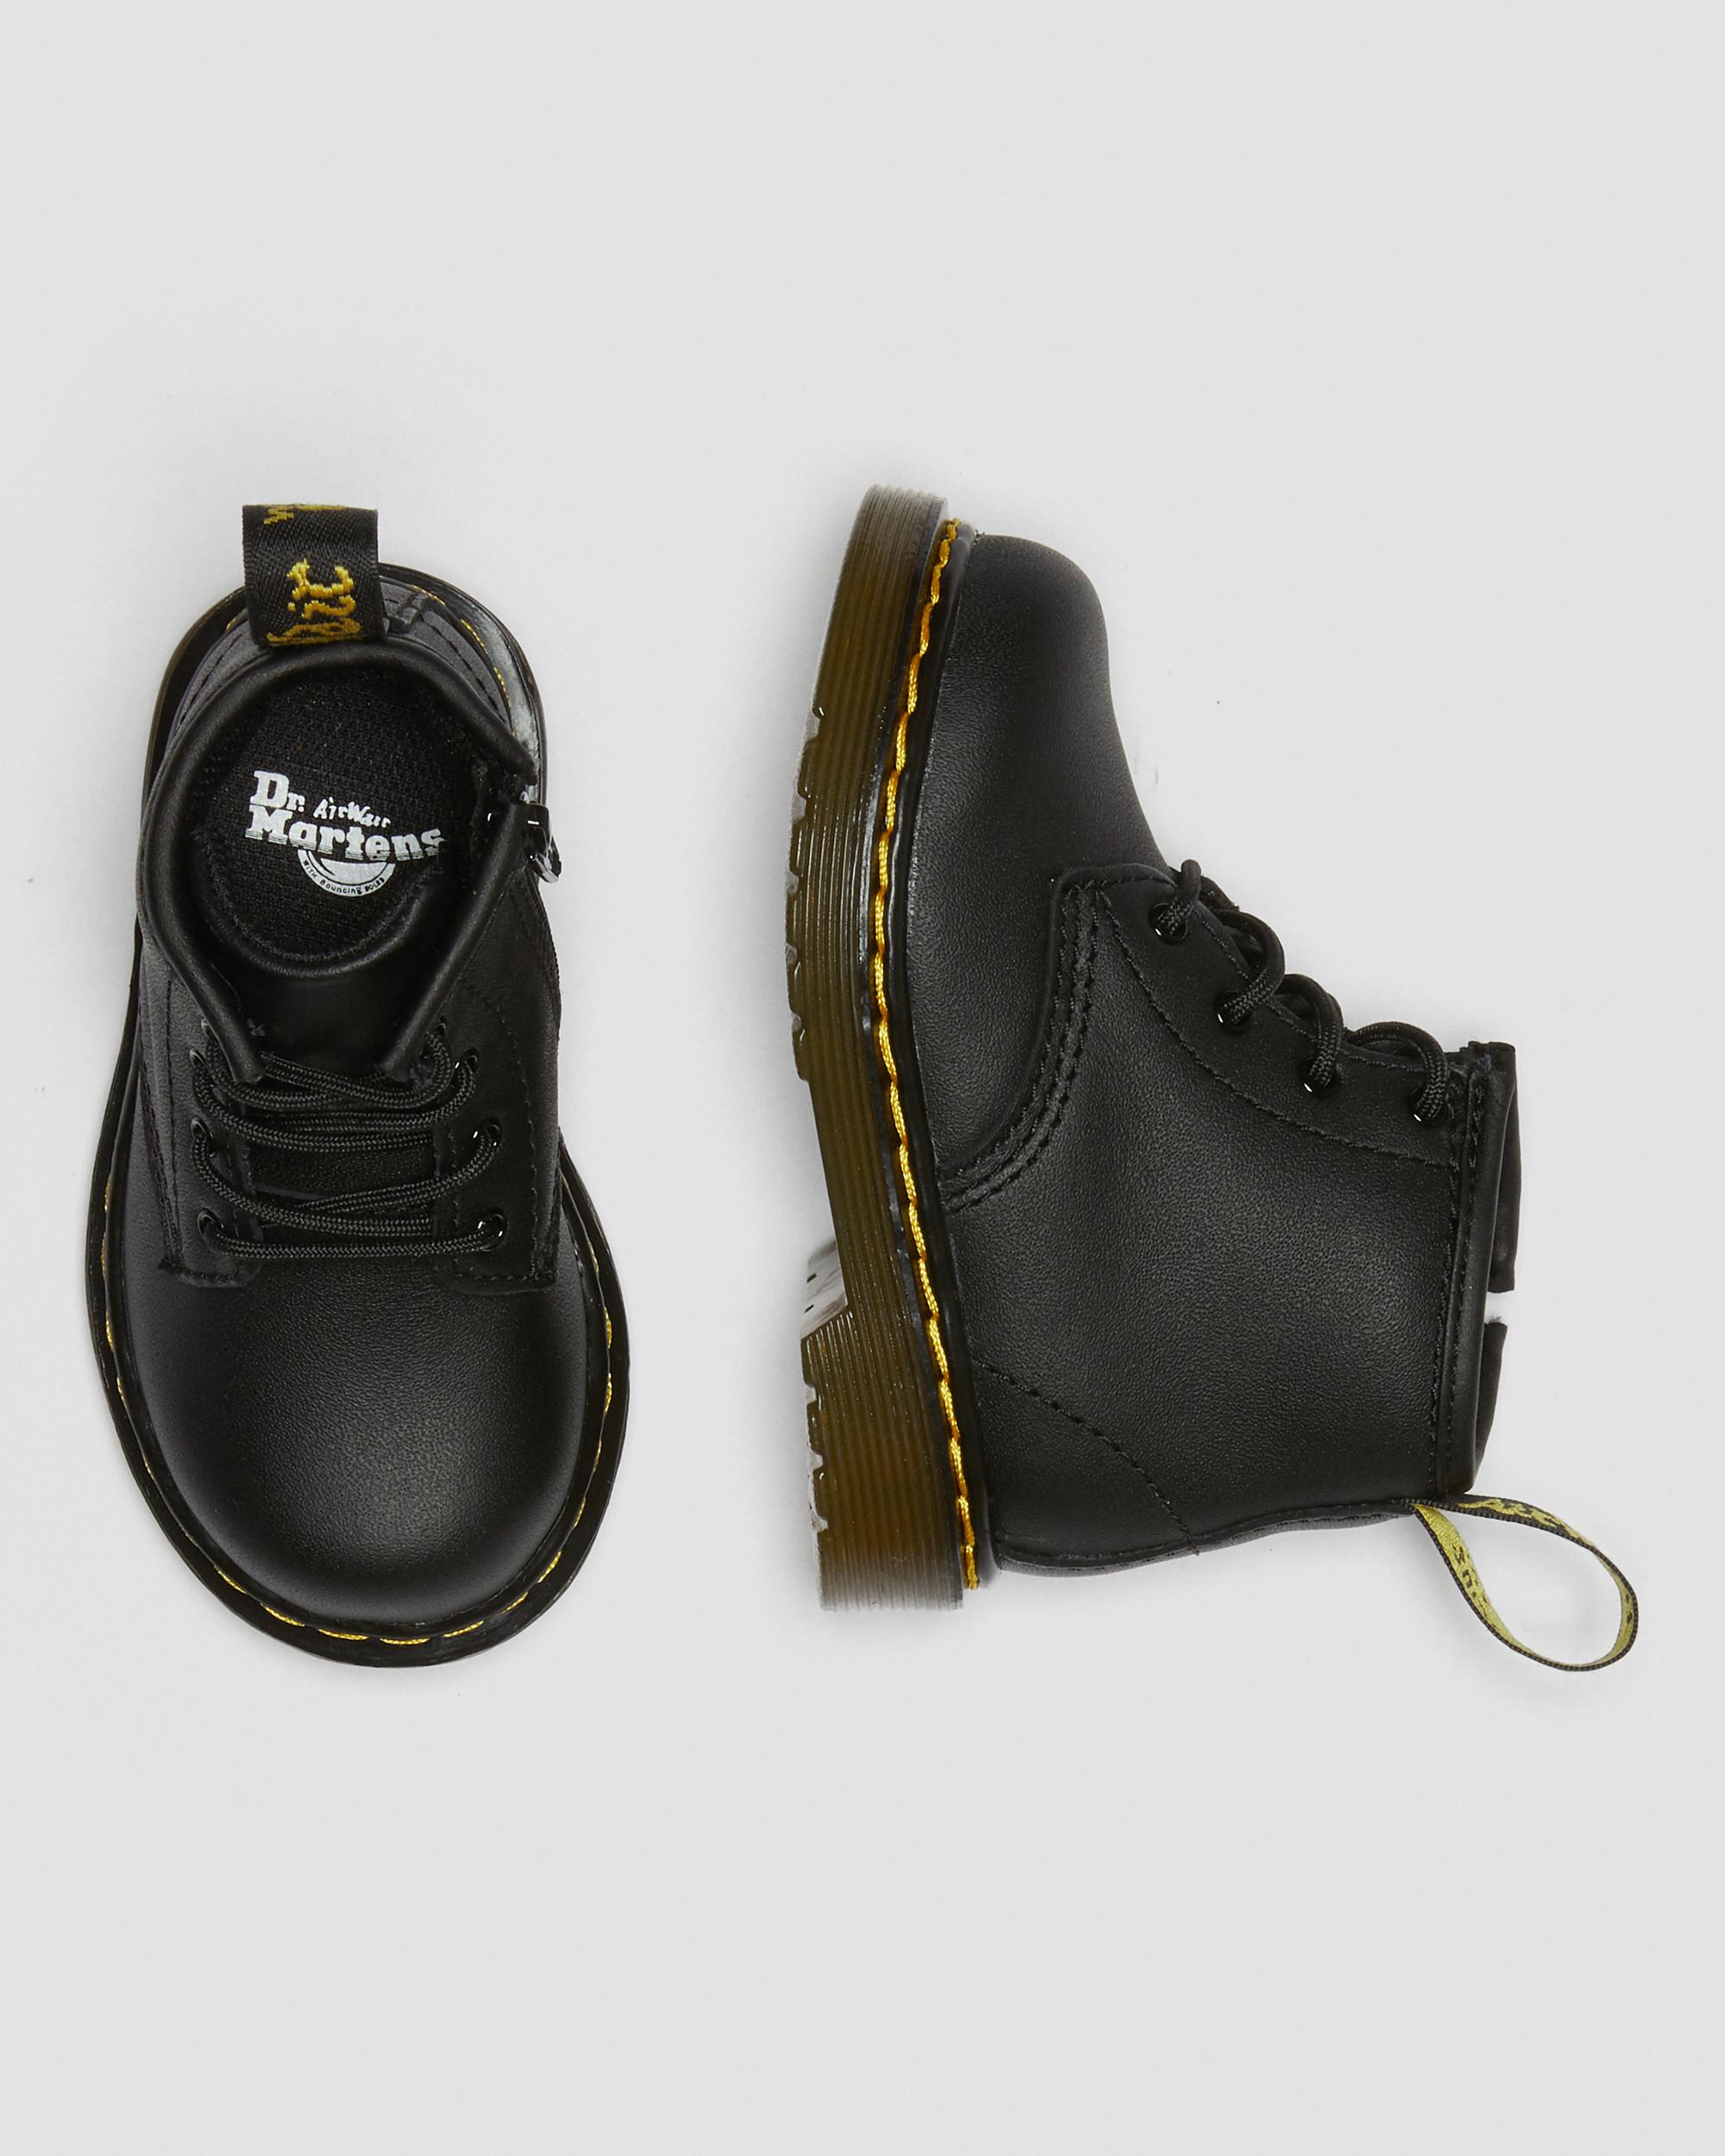 Baby 1460 Softy T Dr. Martens